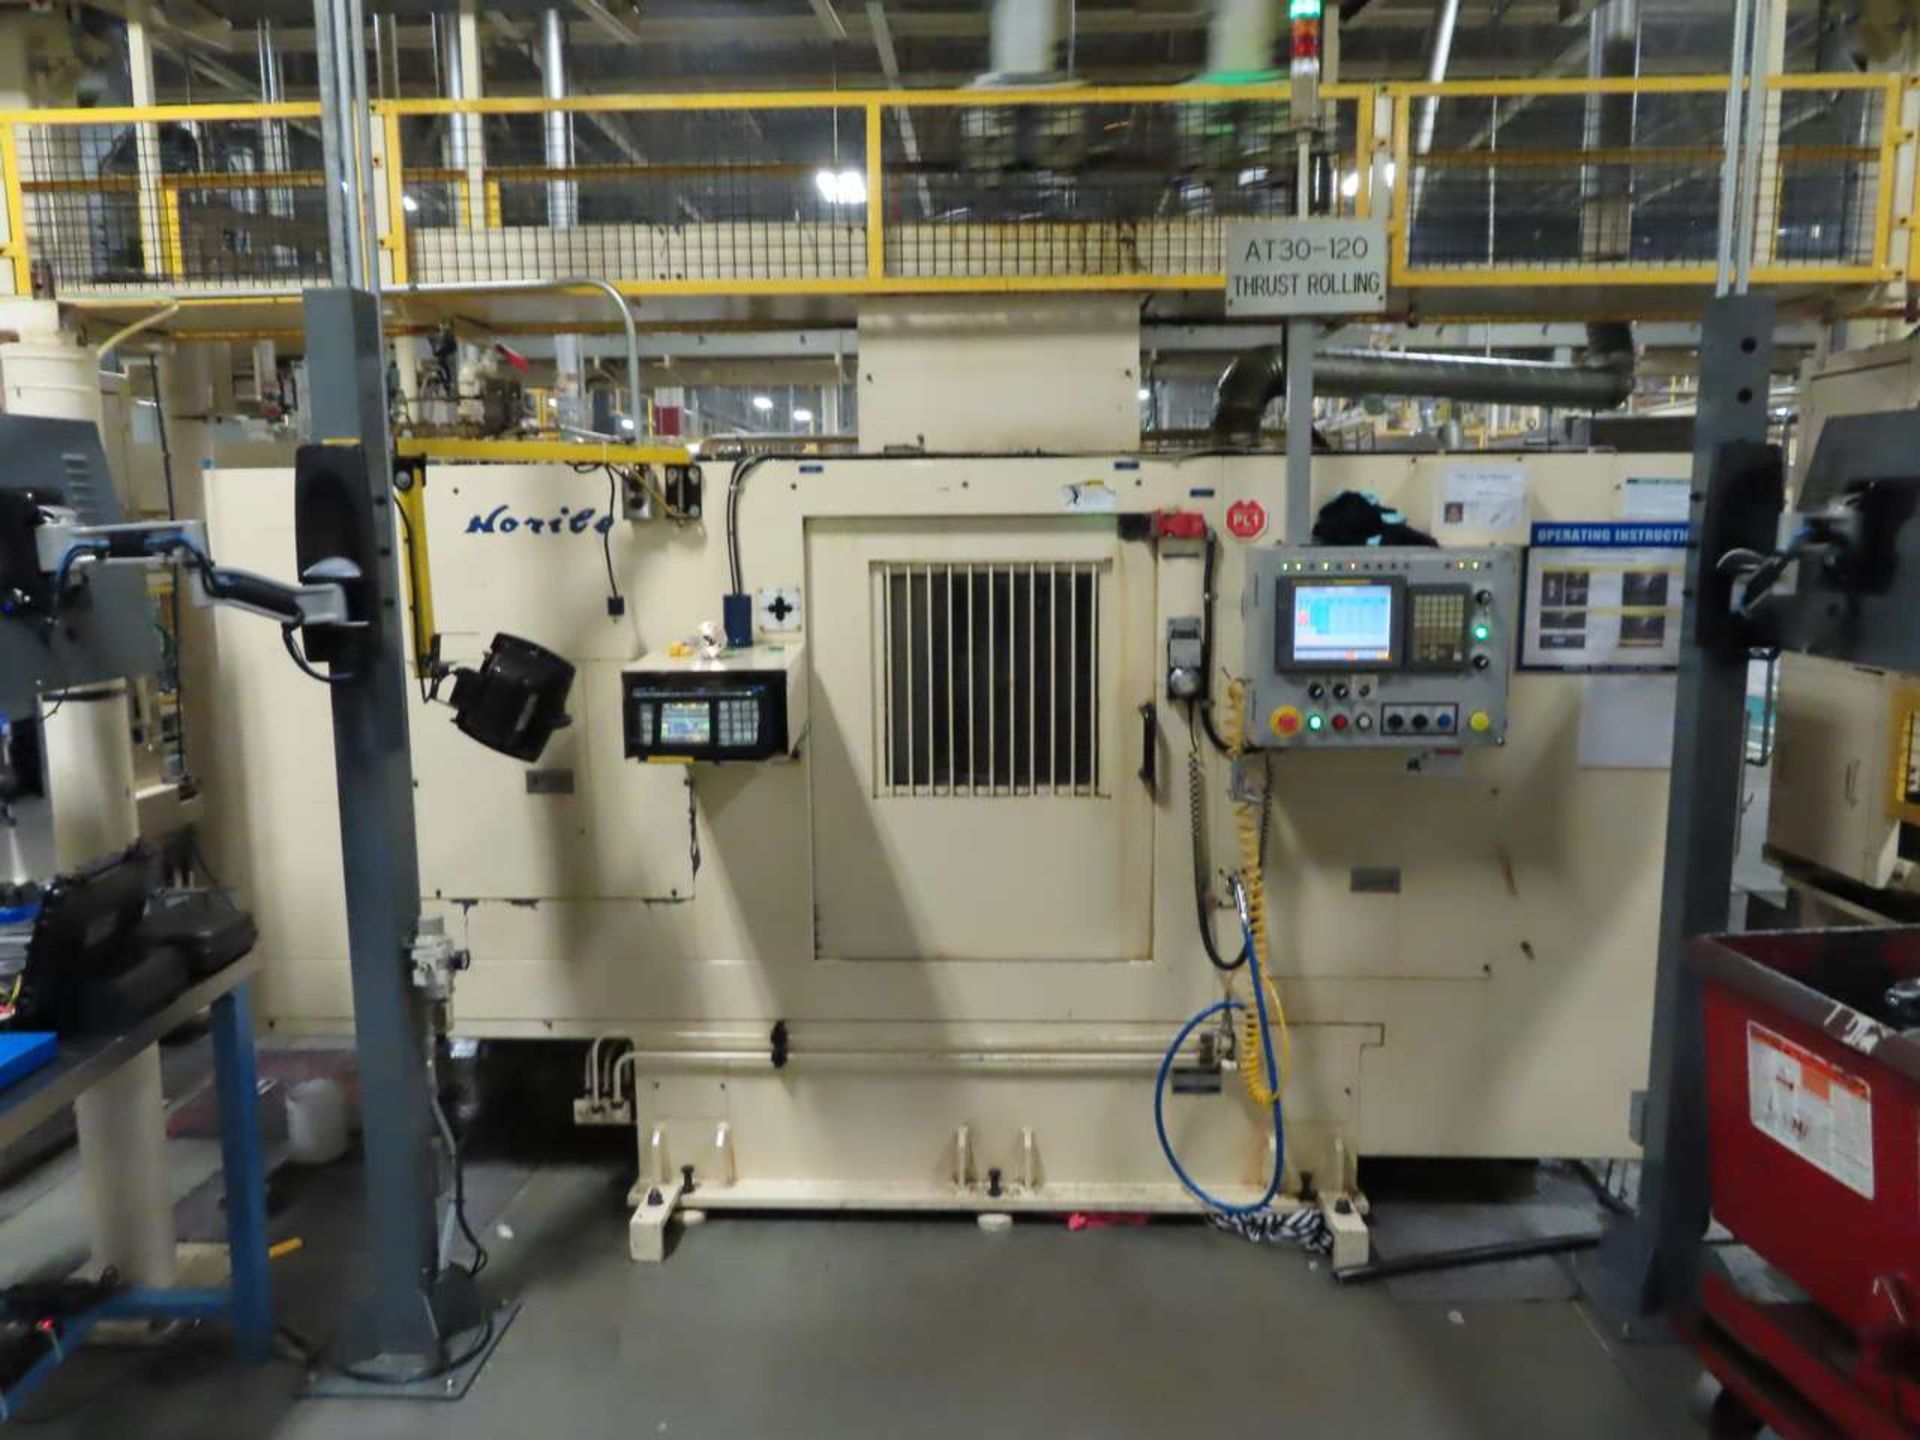 2007 Horibe NX2-SP8T/RB CNC Lathe used for Thrust Rolling